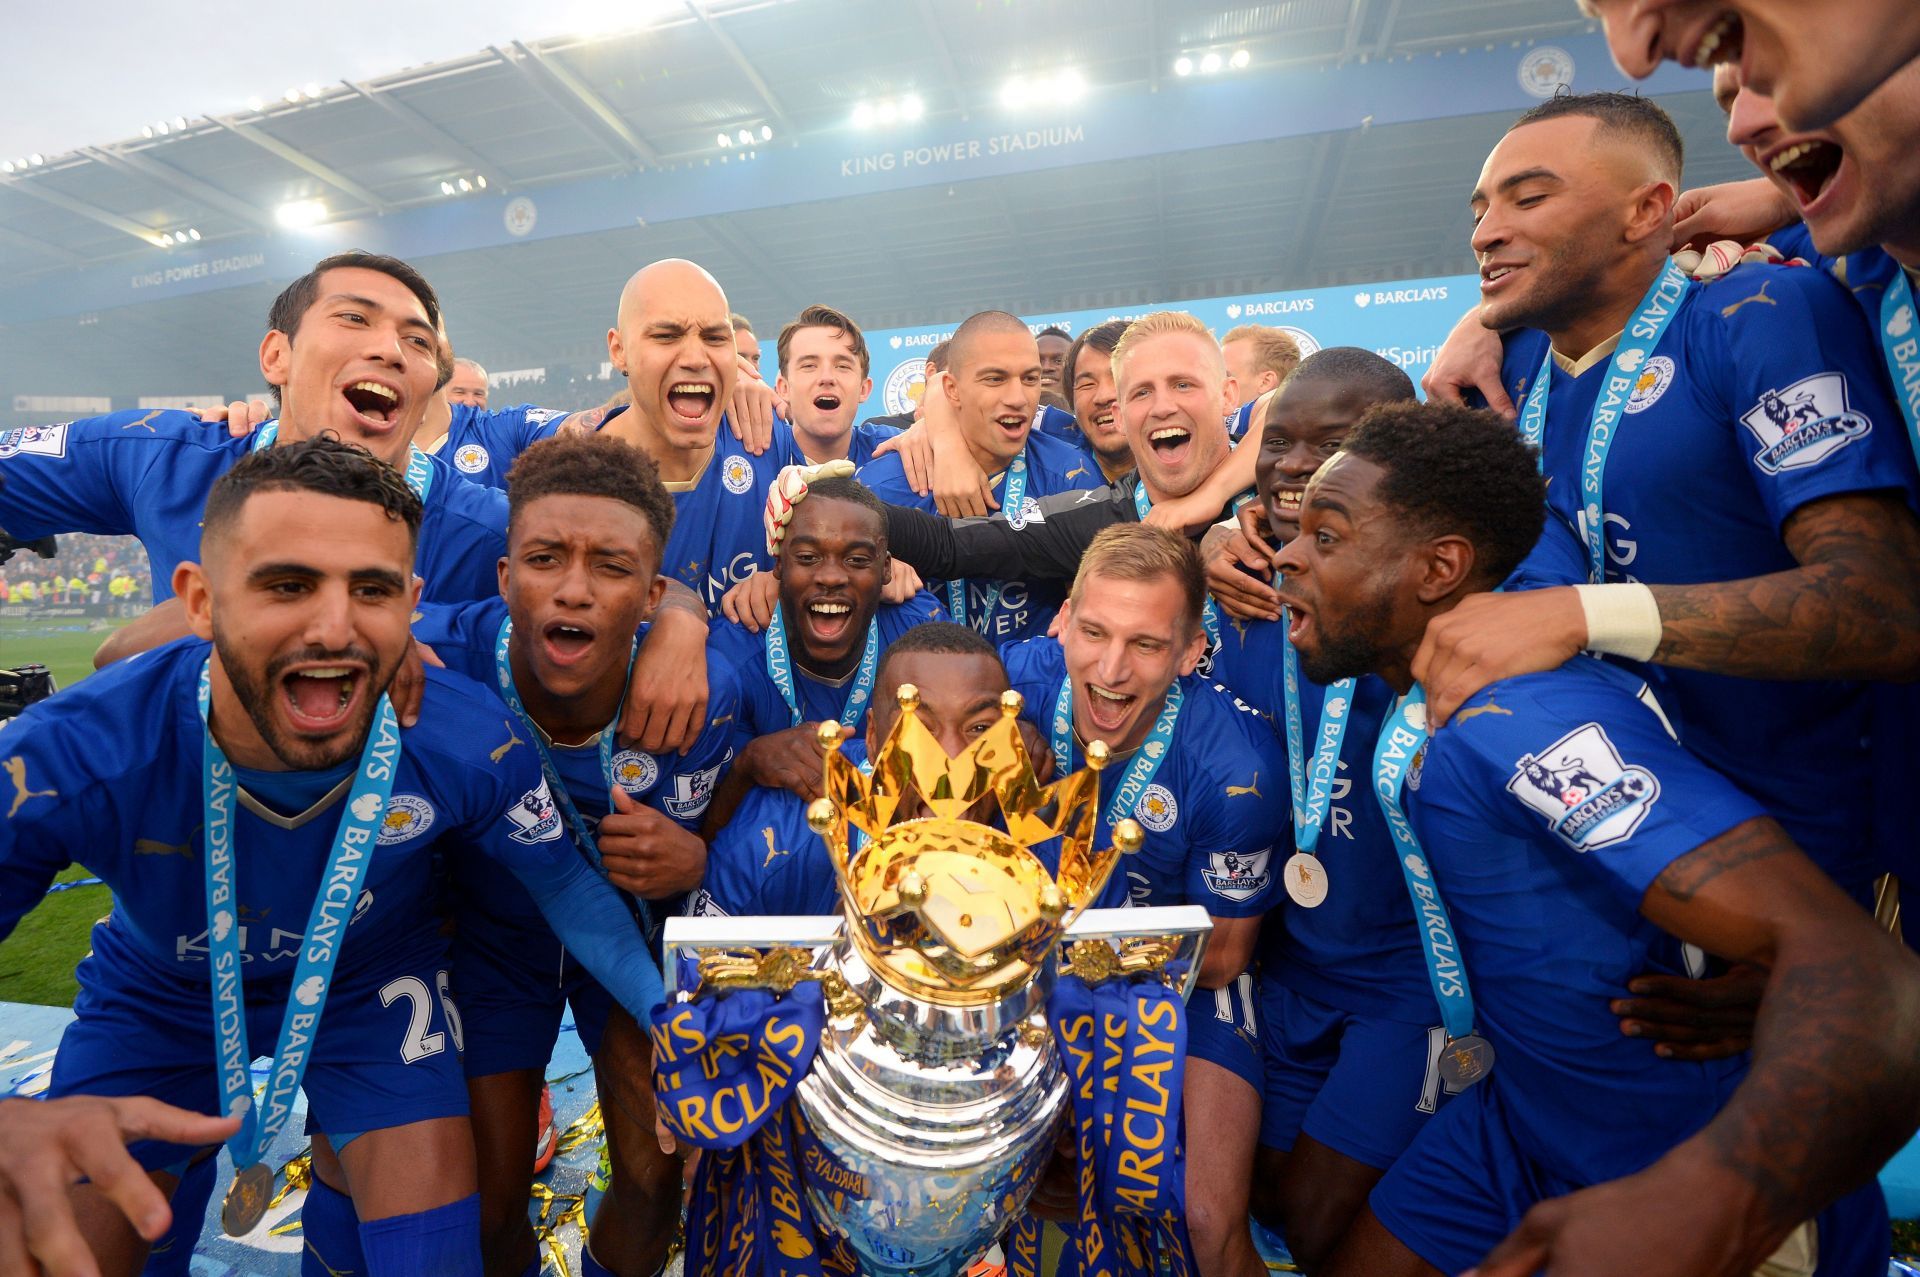 Leicester City maybe a top team now, but it started differently